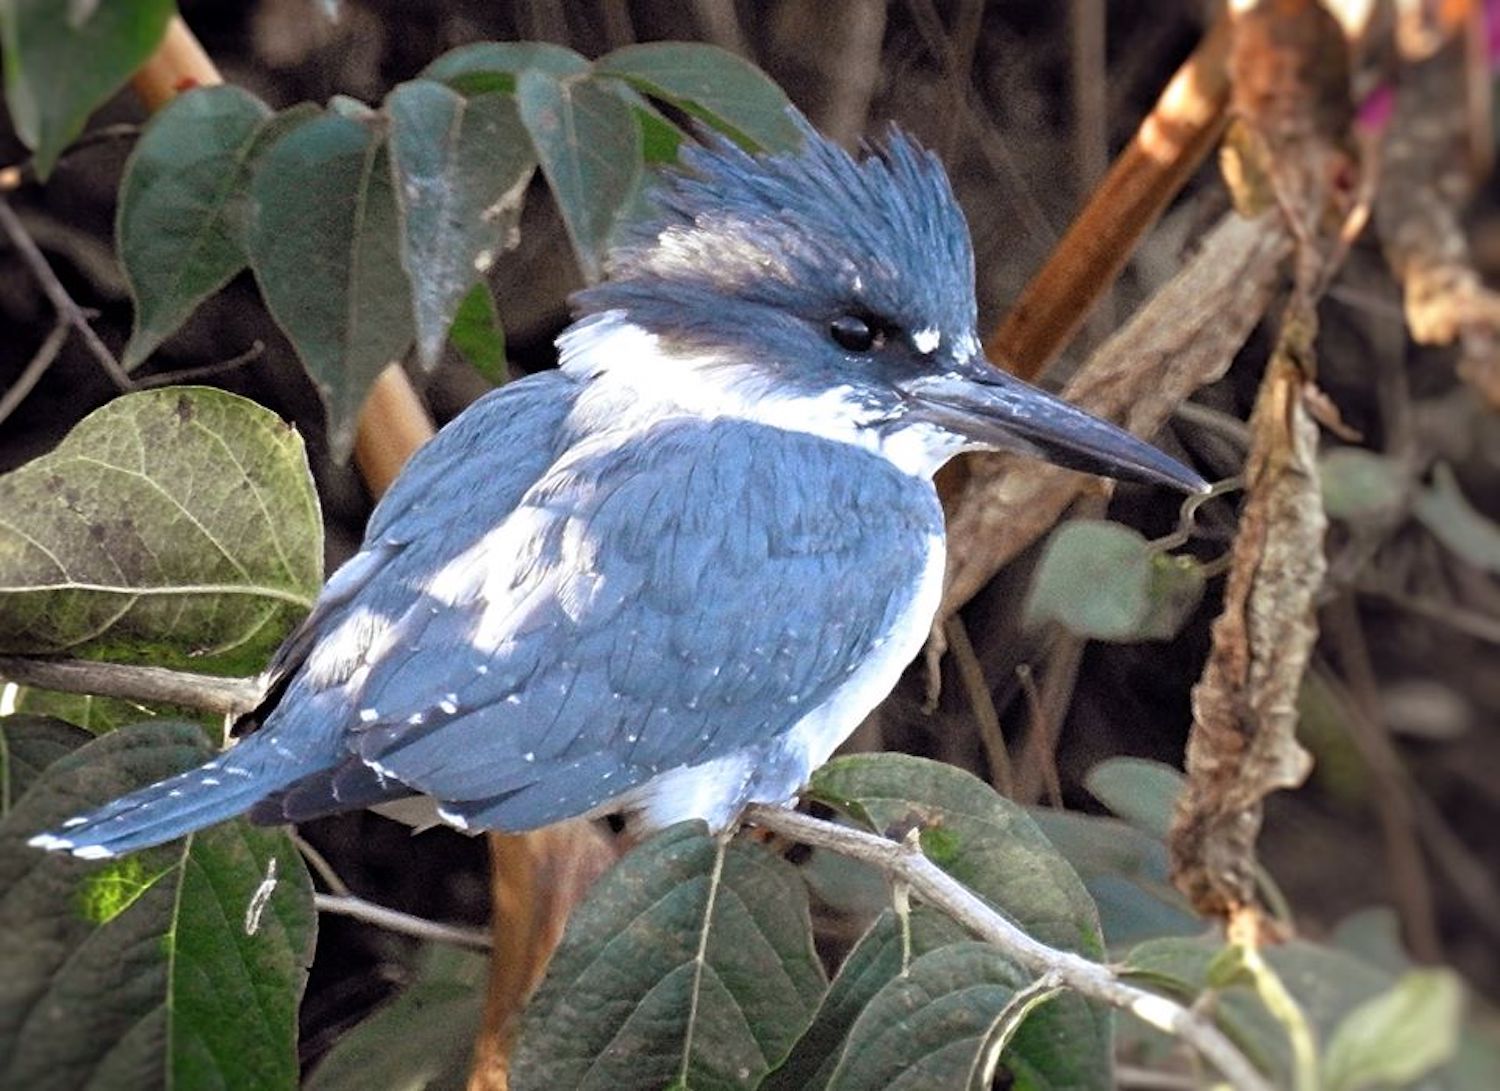 Keep your eyes open for the Belted Kingfisher